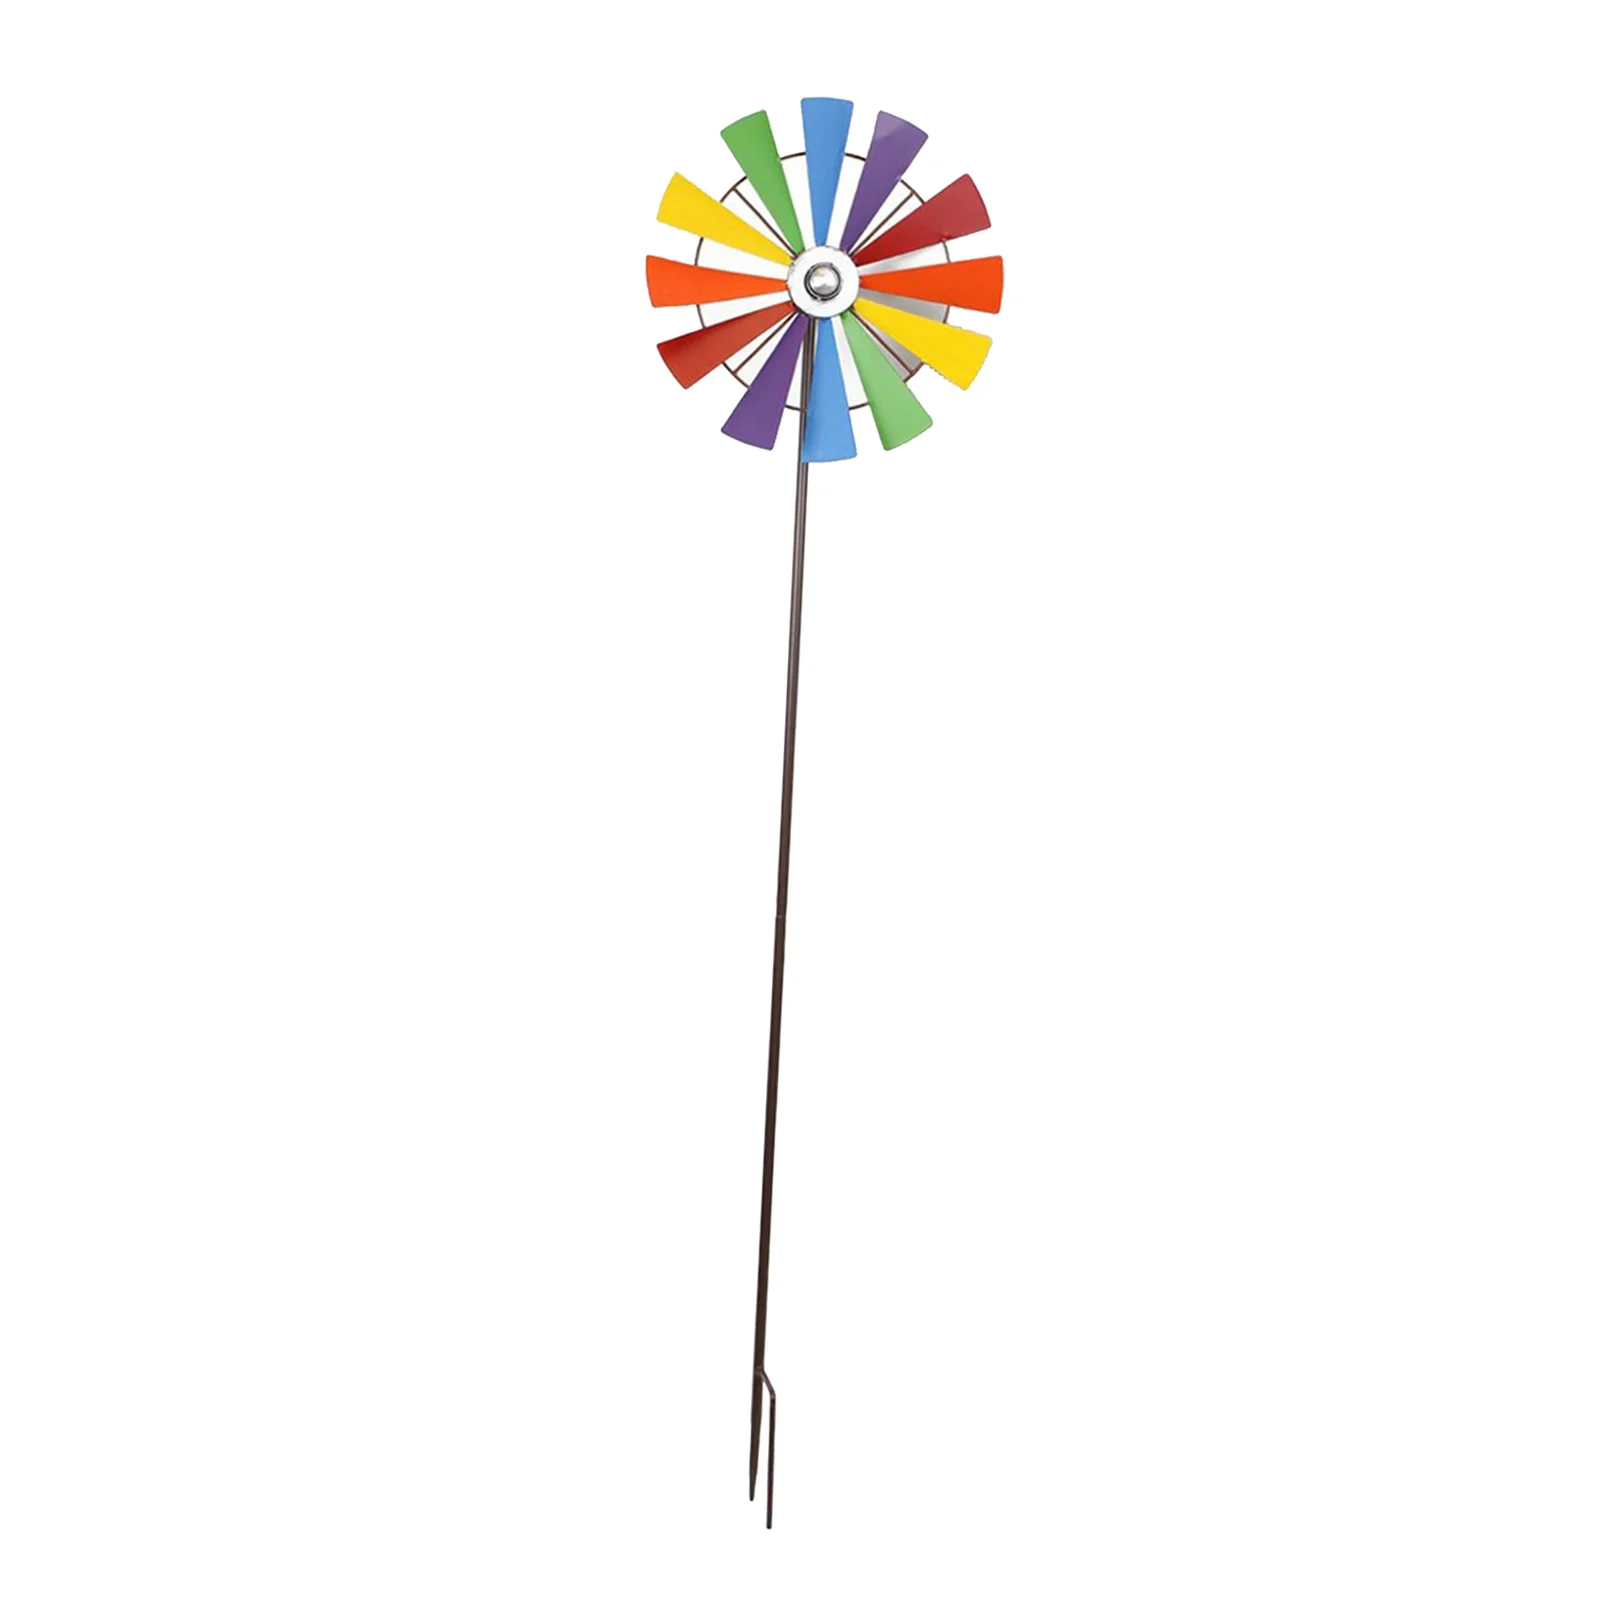 Rainbow Colors Vitality Durable Pinwheel Windmill Toys Ornaments for Yard Decor Lawn Decorative Garden Stakes Whimsical